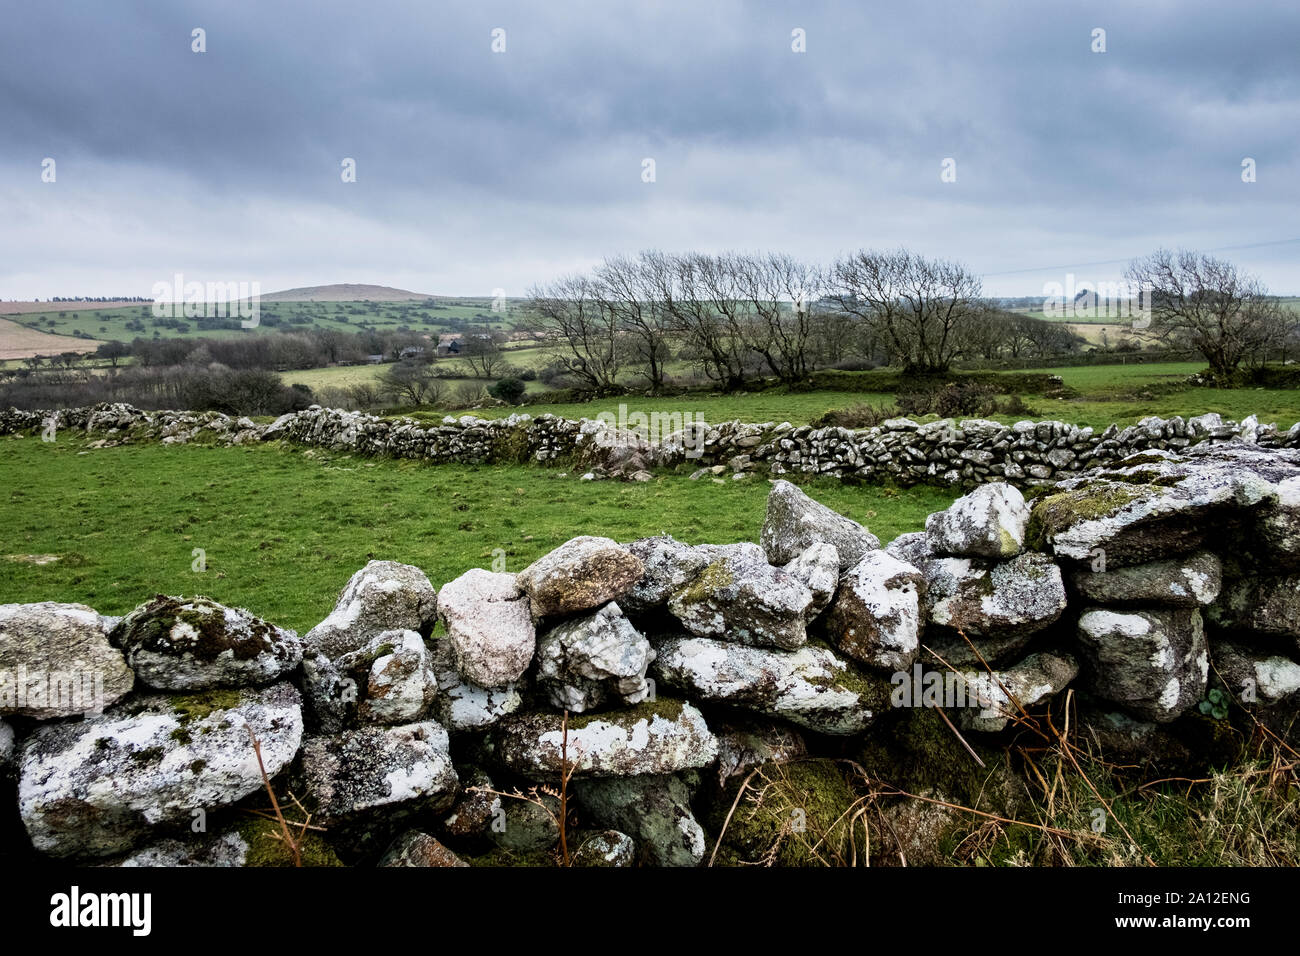 Landscape with dry-stone wall dividing fields, row of trees and hills in the distance. Stock Photo